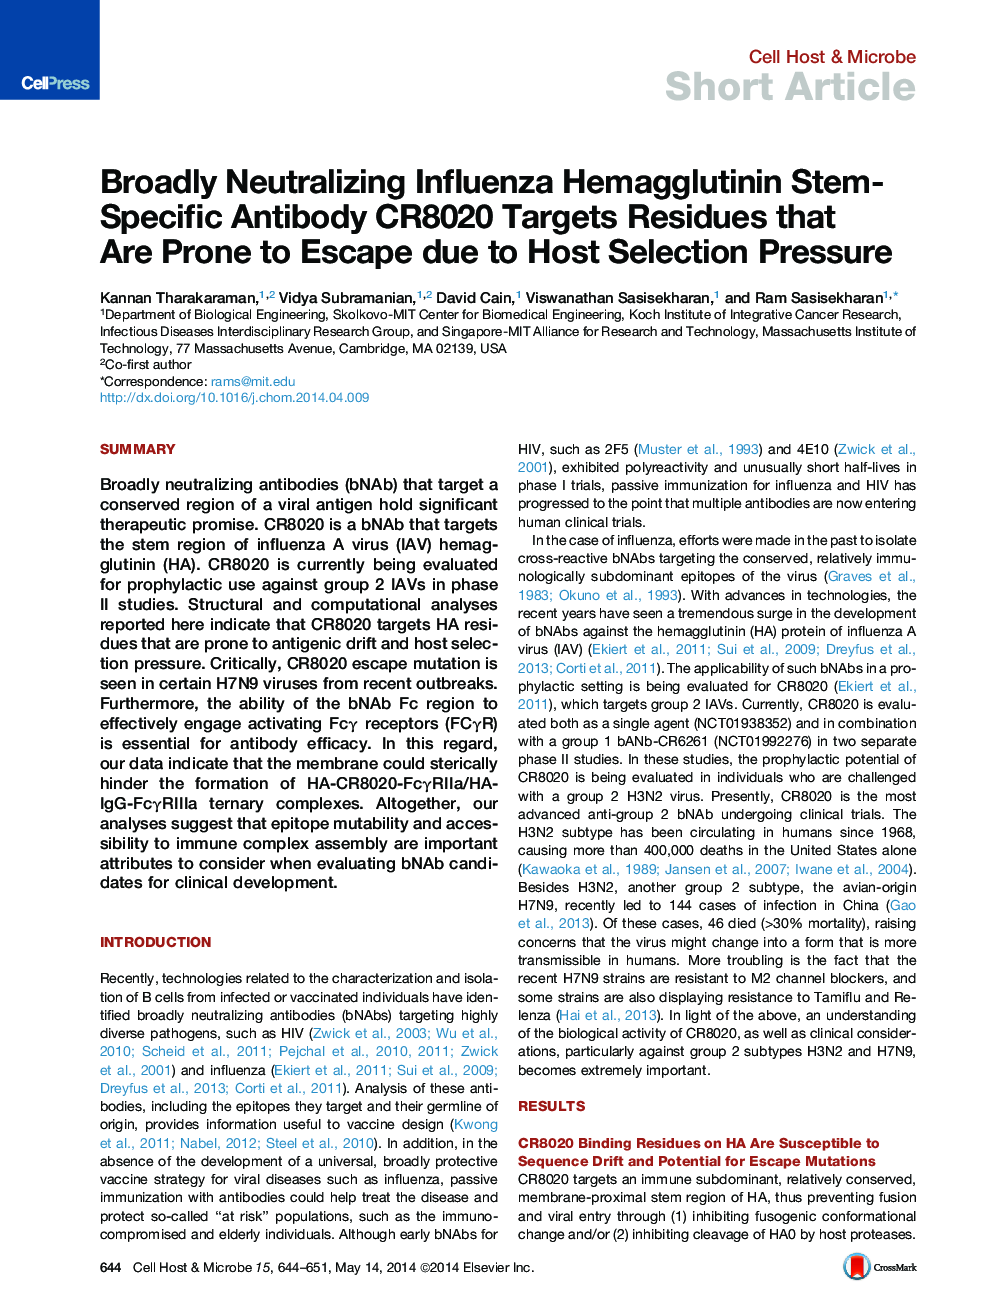 Broadly Neutralizing Influenza Hemagglutinin Stem-Specific Antibody CR8020 Targets Residues that Are Prone to Escape due to Host Selection Pressure